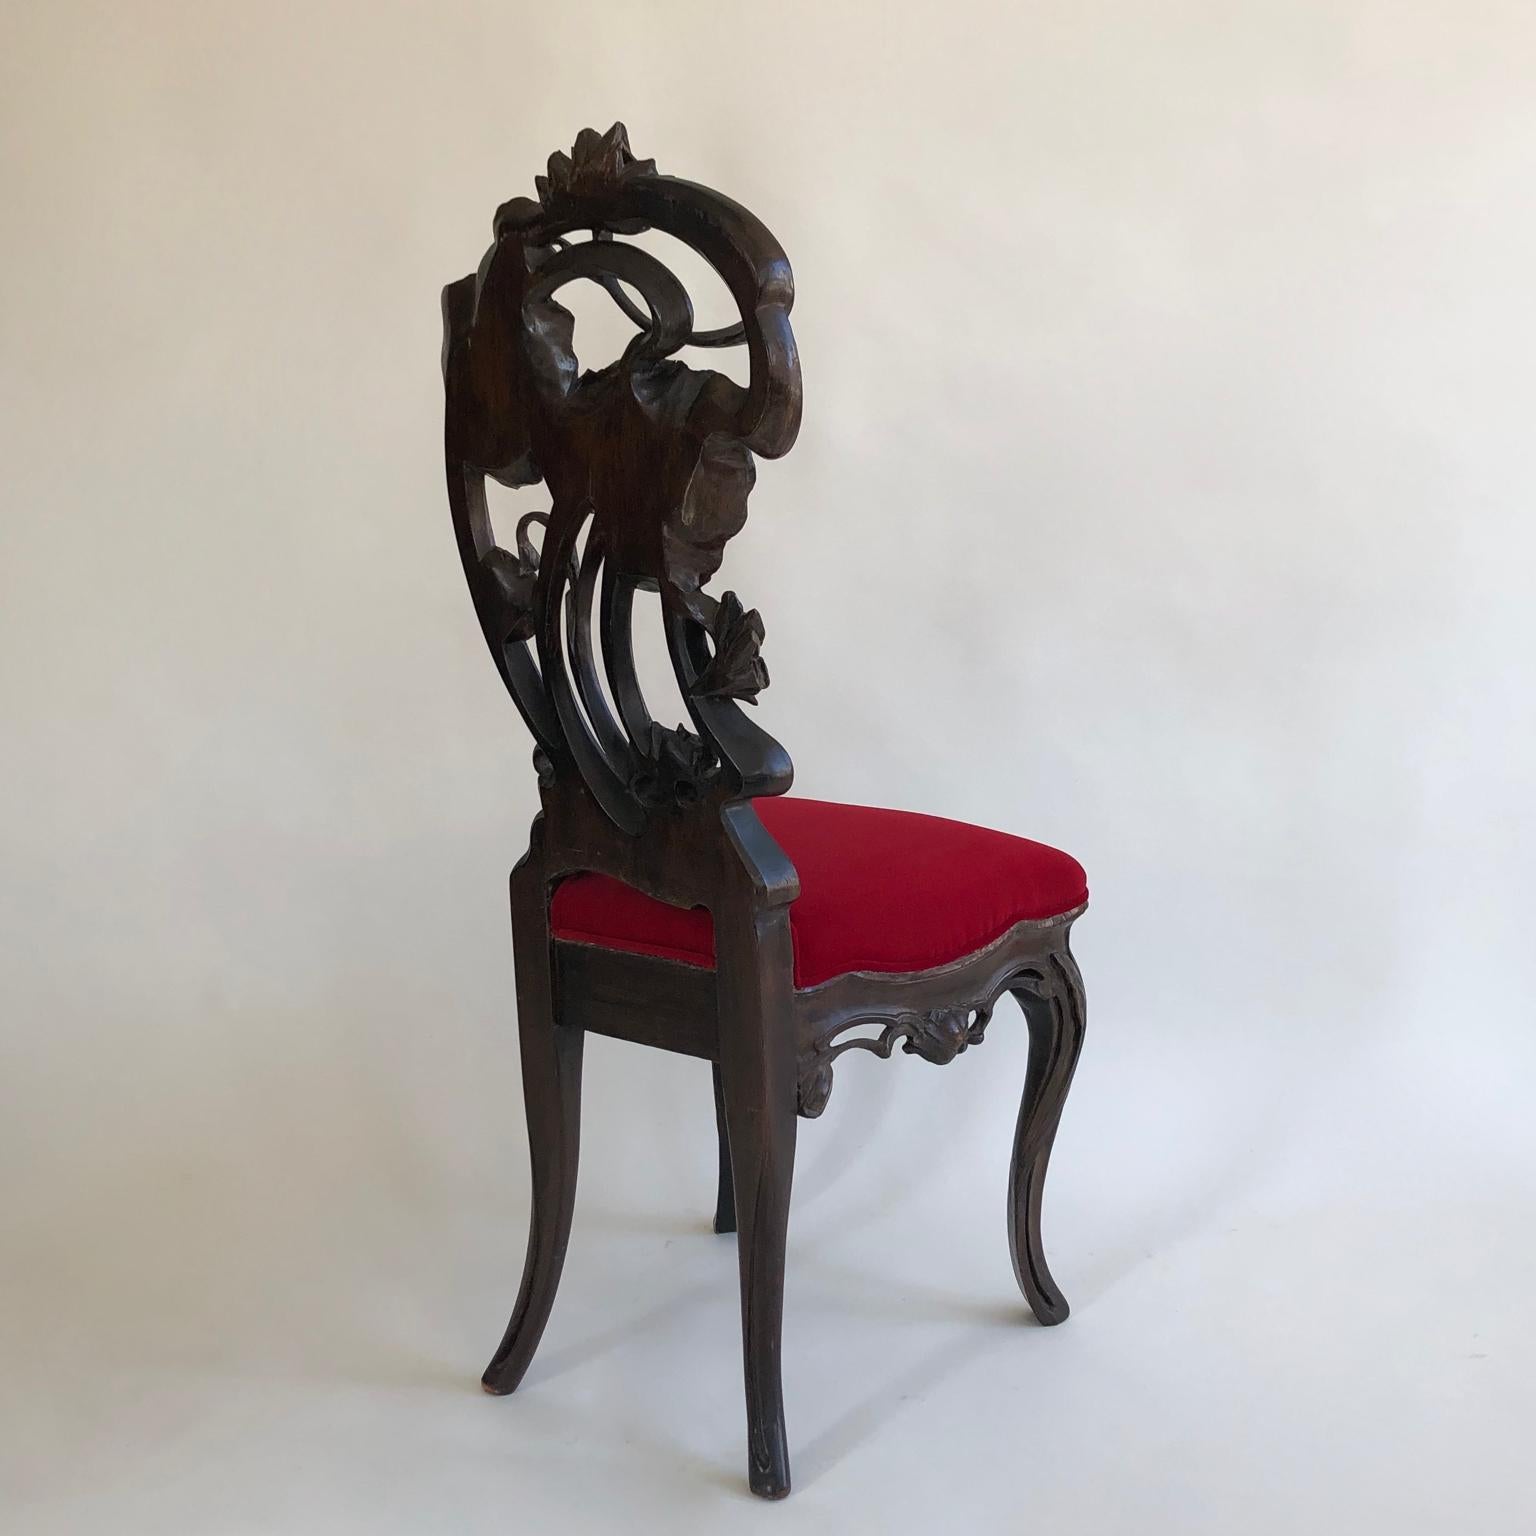 20th Century Art Nouveau Hand Carved Wooden Hall Chair with a Red Velvet Seat, circa 1900